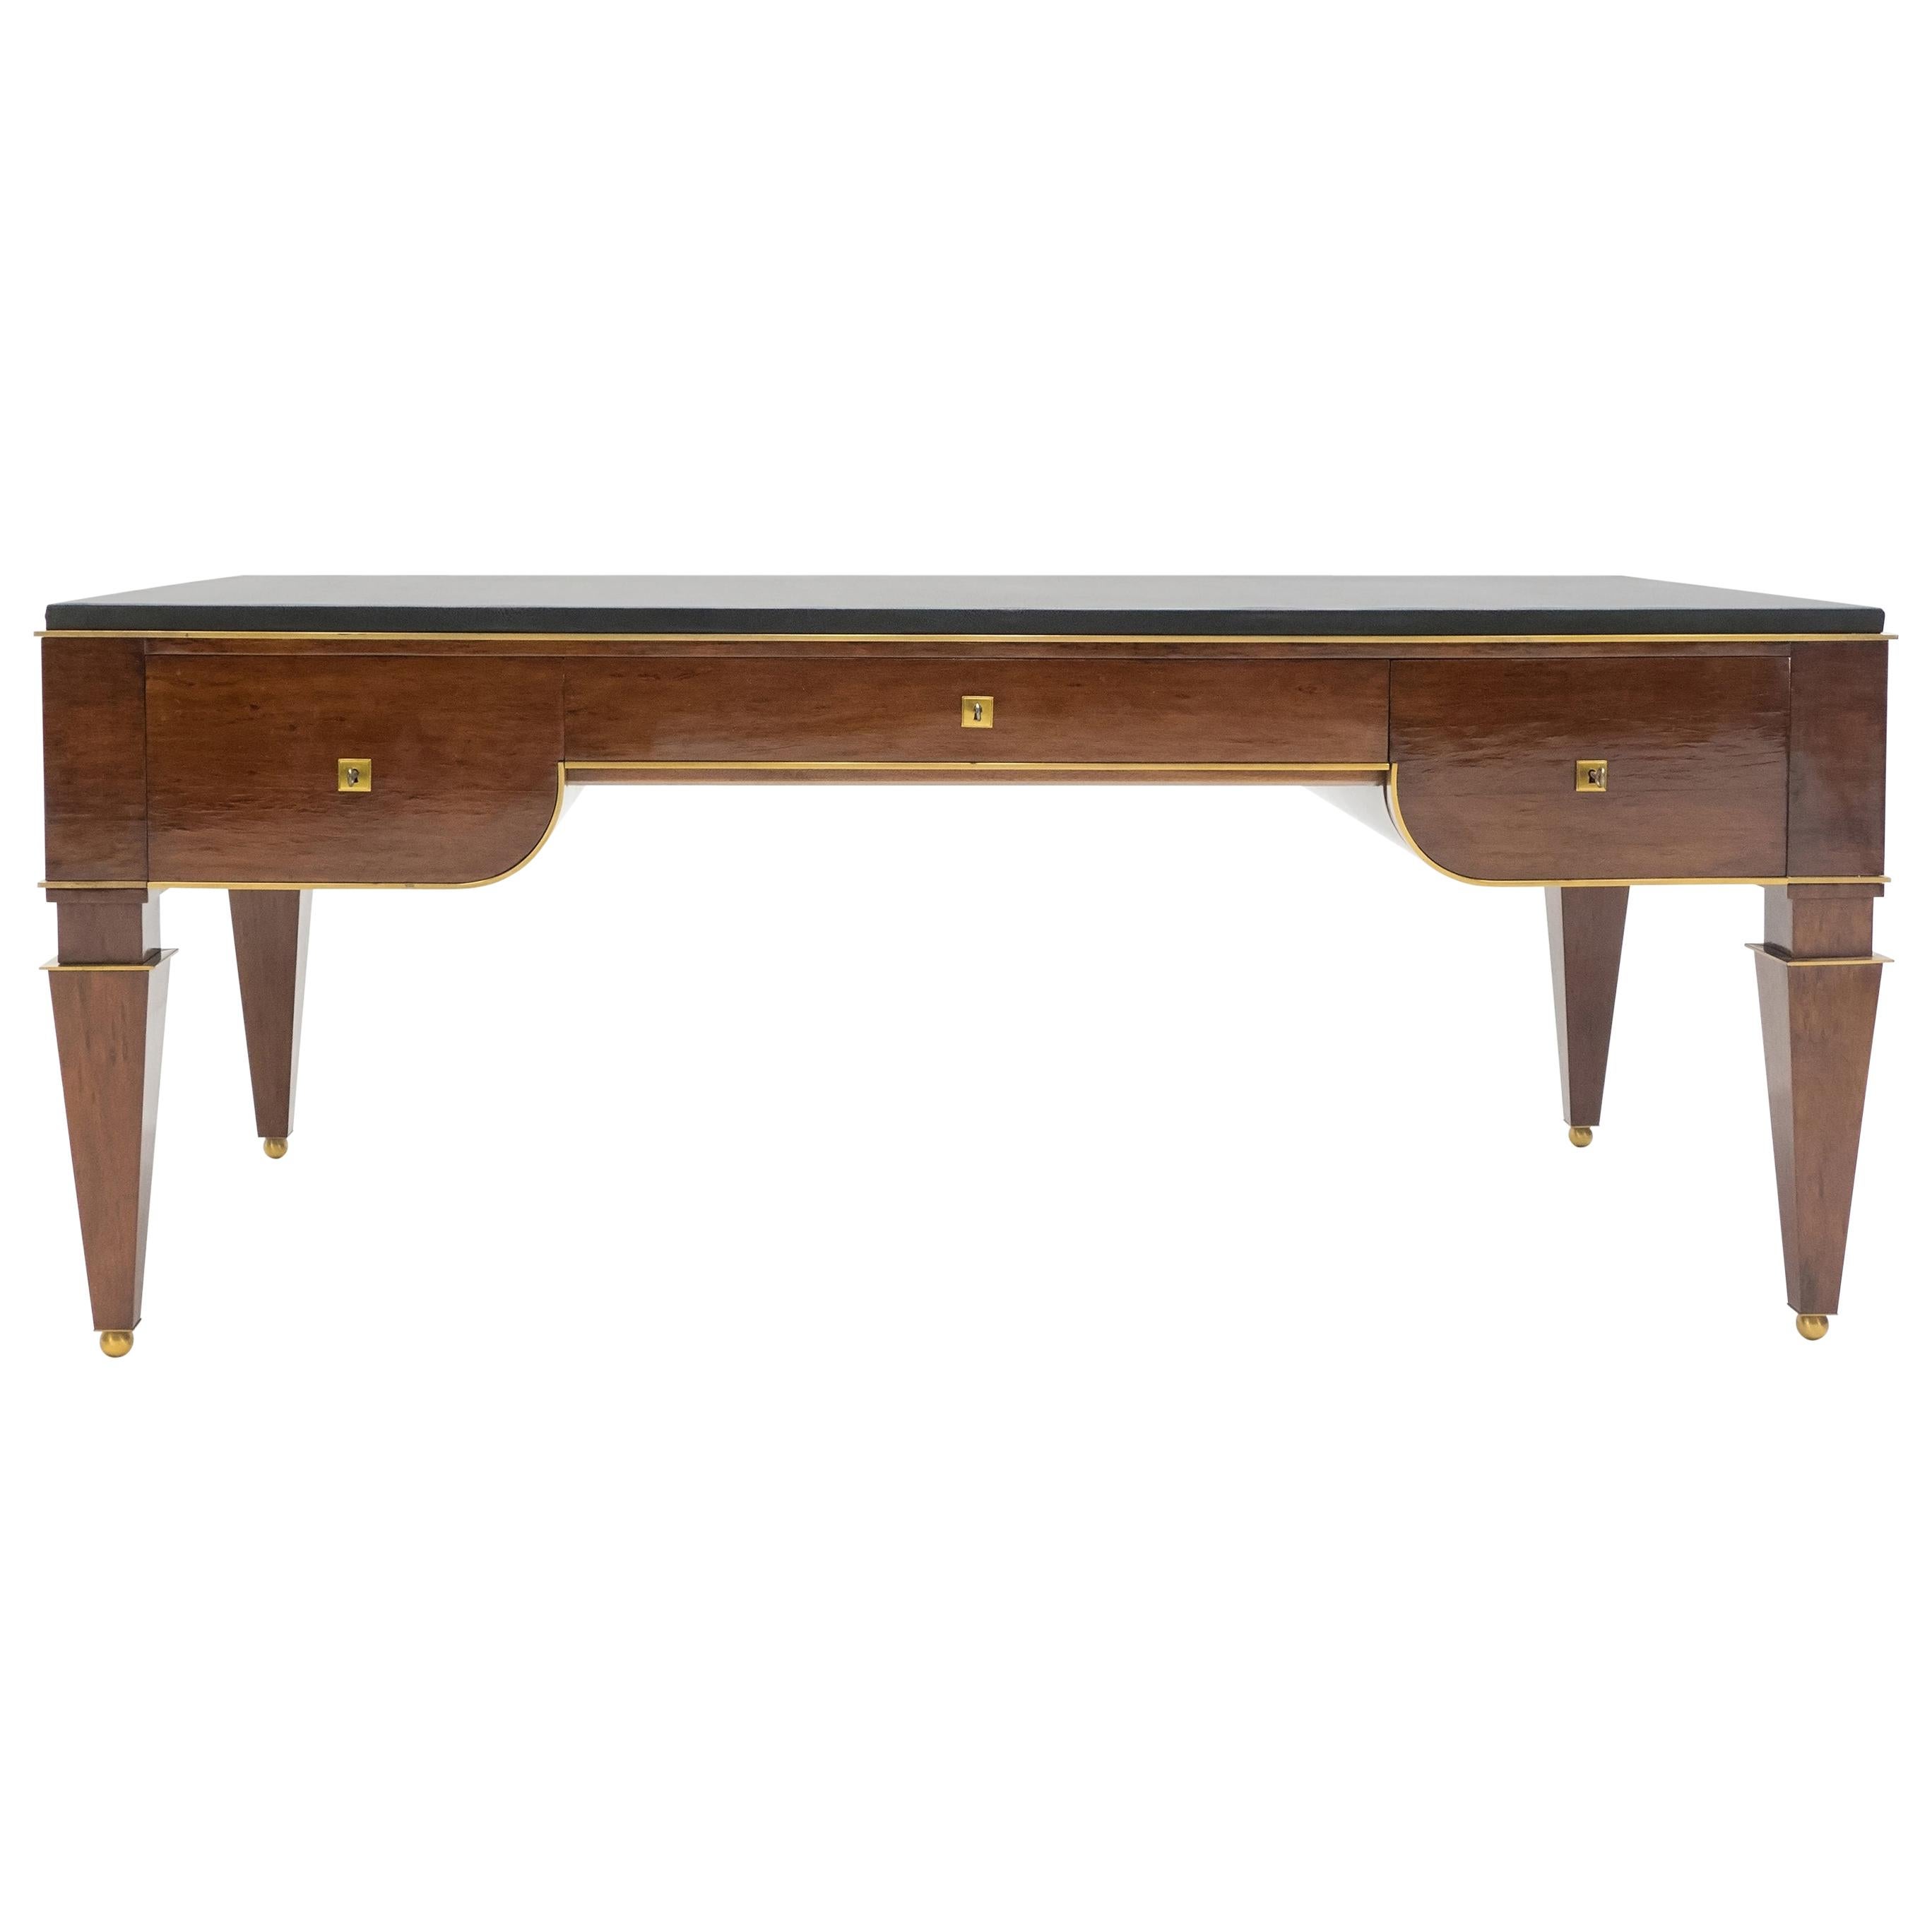 This rare and beautiful French neoclassical was made in the early 1940s, and is attributed to Maison Dominique. The woodwork, pure line and brass accents and details are just wonderful. It features a full black leather top, with three large drawers